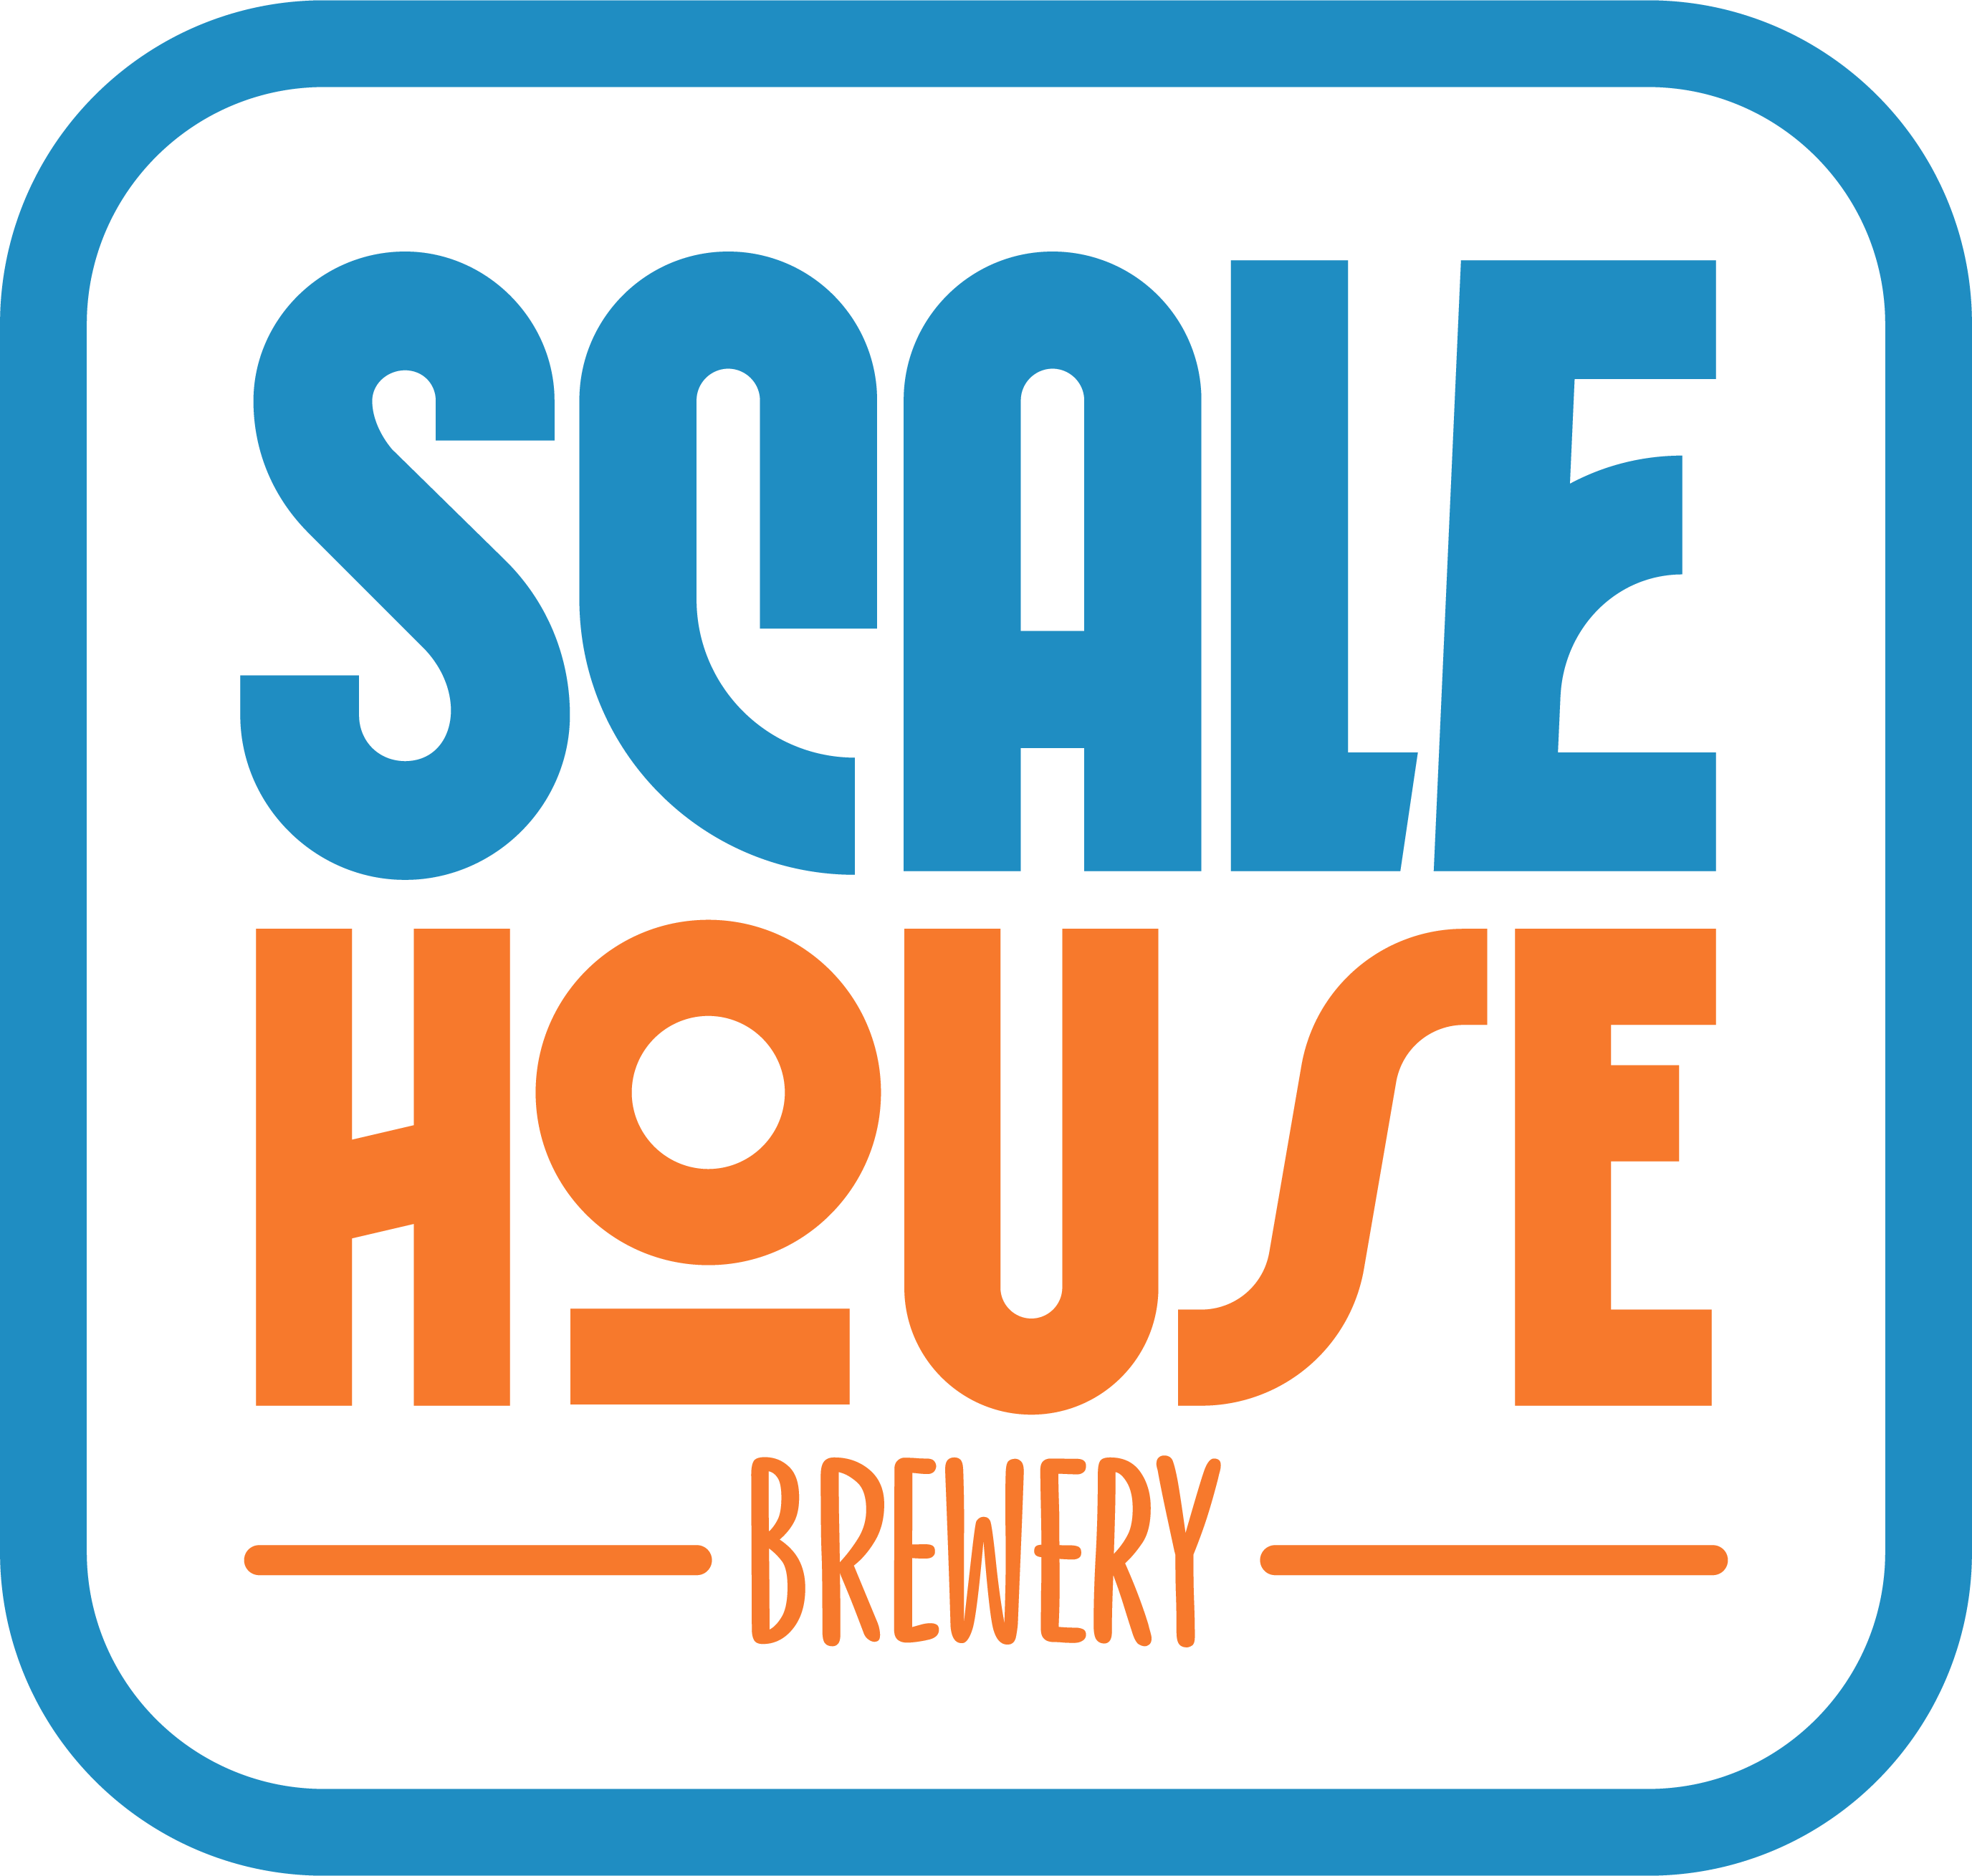 Home Scale House Brewery Hector NY